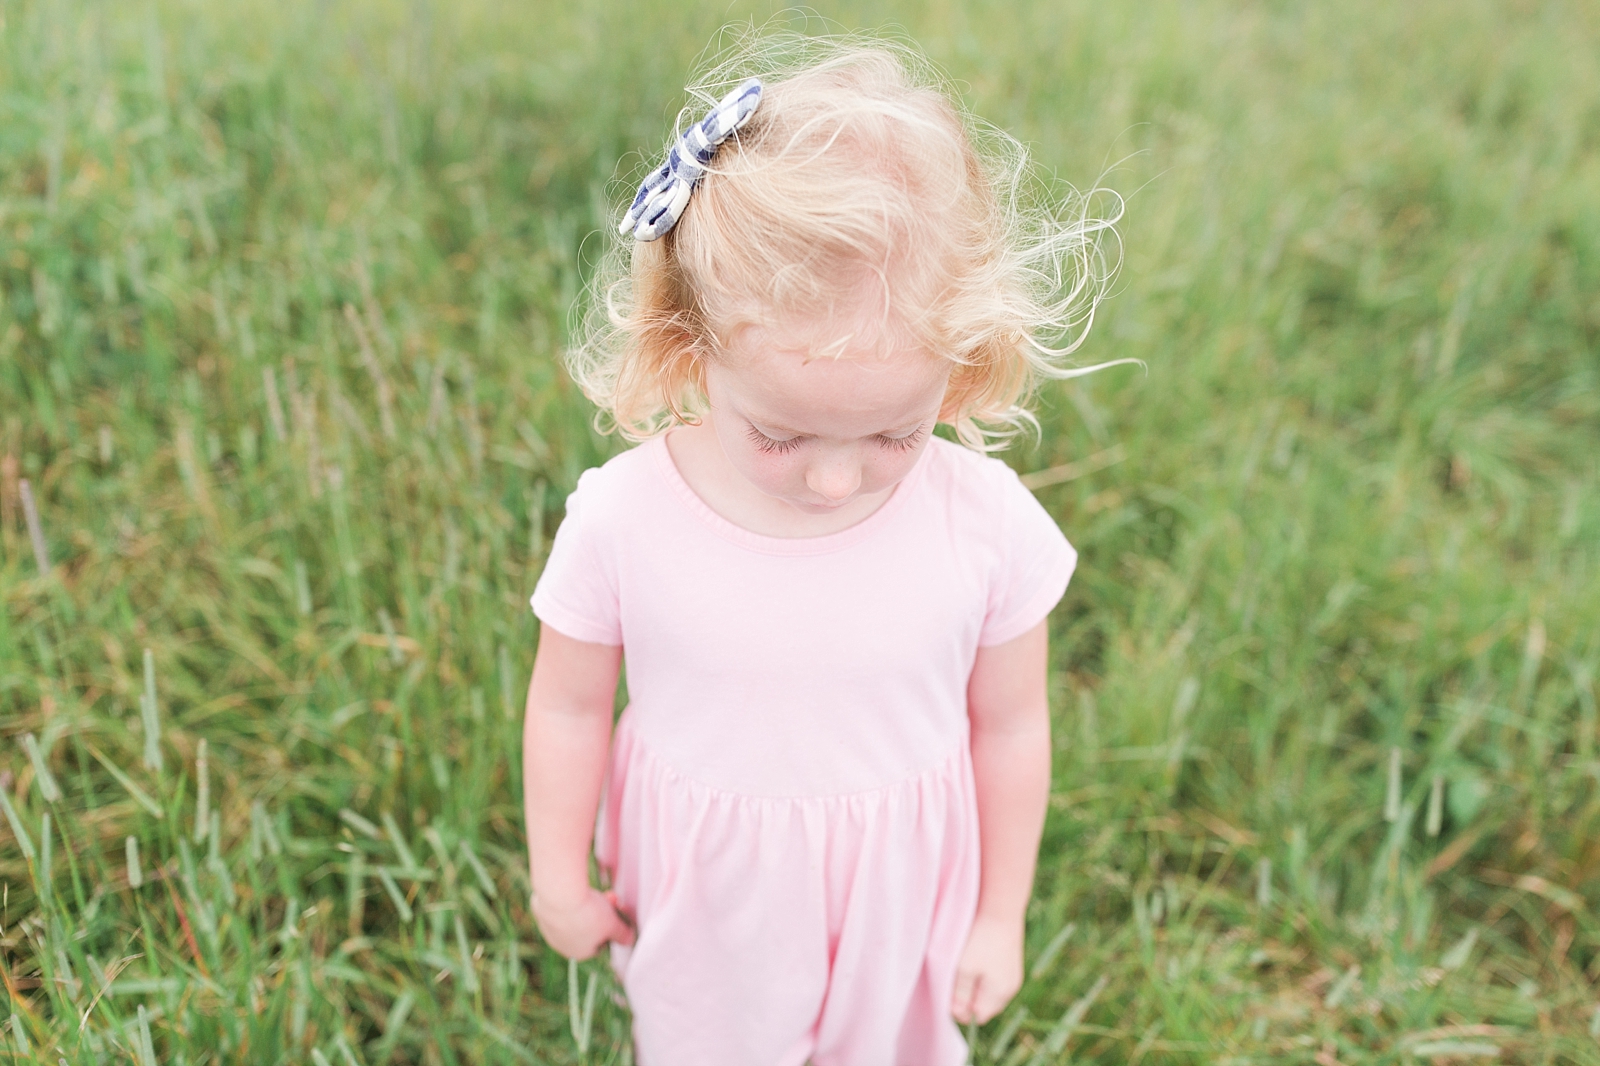 Black Balsam Knob little girl in tall grass looking at the ground with blonde hair blowing in the wind Photo